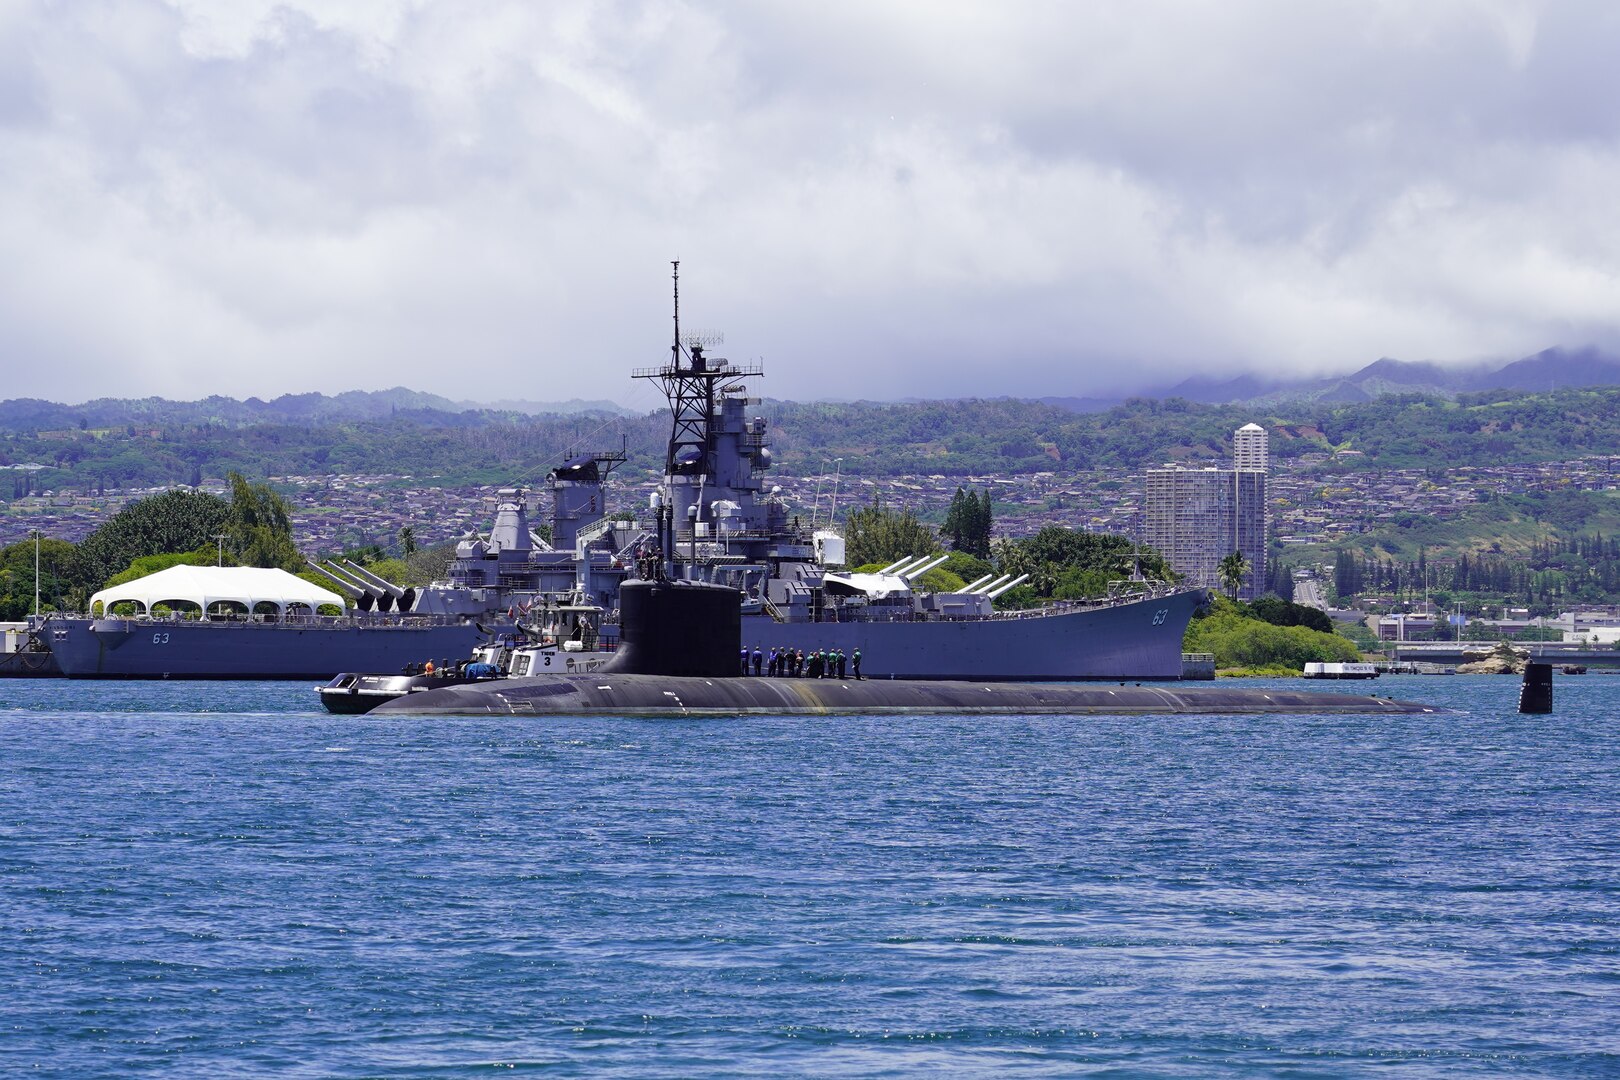 PEARL HARBOR, Hawaii (May 10, 2020) – USS Missouri (SSN 780), a Virginia-class fast-attack submarine, passes the historic battleship Missouri (BB-63) before departing for sea trials on May 10.  Missouri's routine maintenance and modernization work was completed five days ahead of schedule after successful sea trials and certification. The submarine's recent availability at Pearl Harbor Naval Shipyard and Intermediate Maintenance Facility required 2.2 million work-hours to complete more than 20,000 jobs that will ensure the ship remains fully operational for its planned 33-year service life.